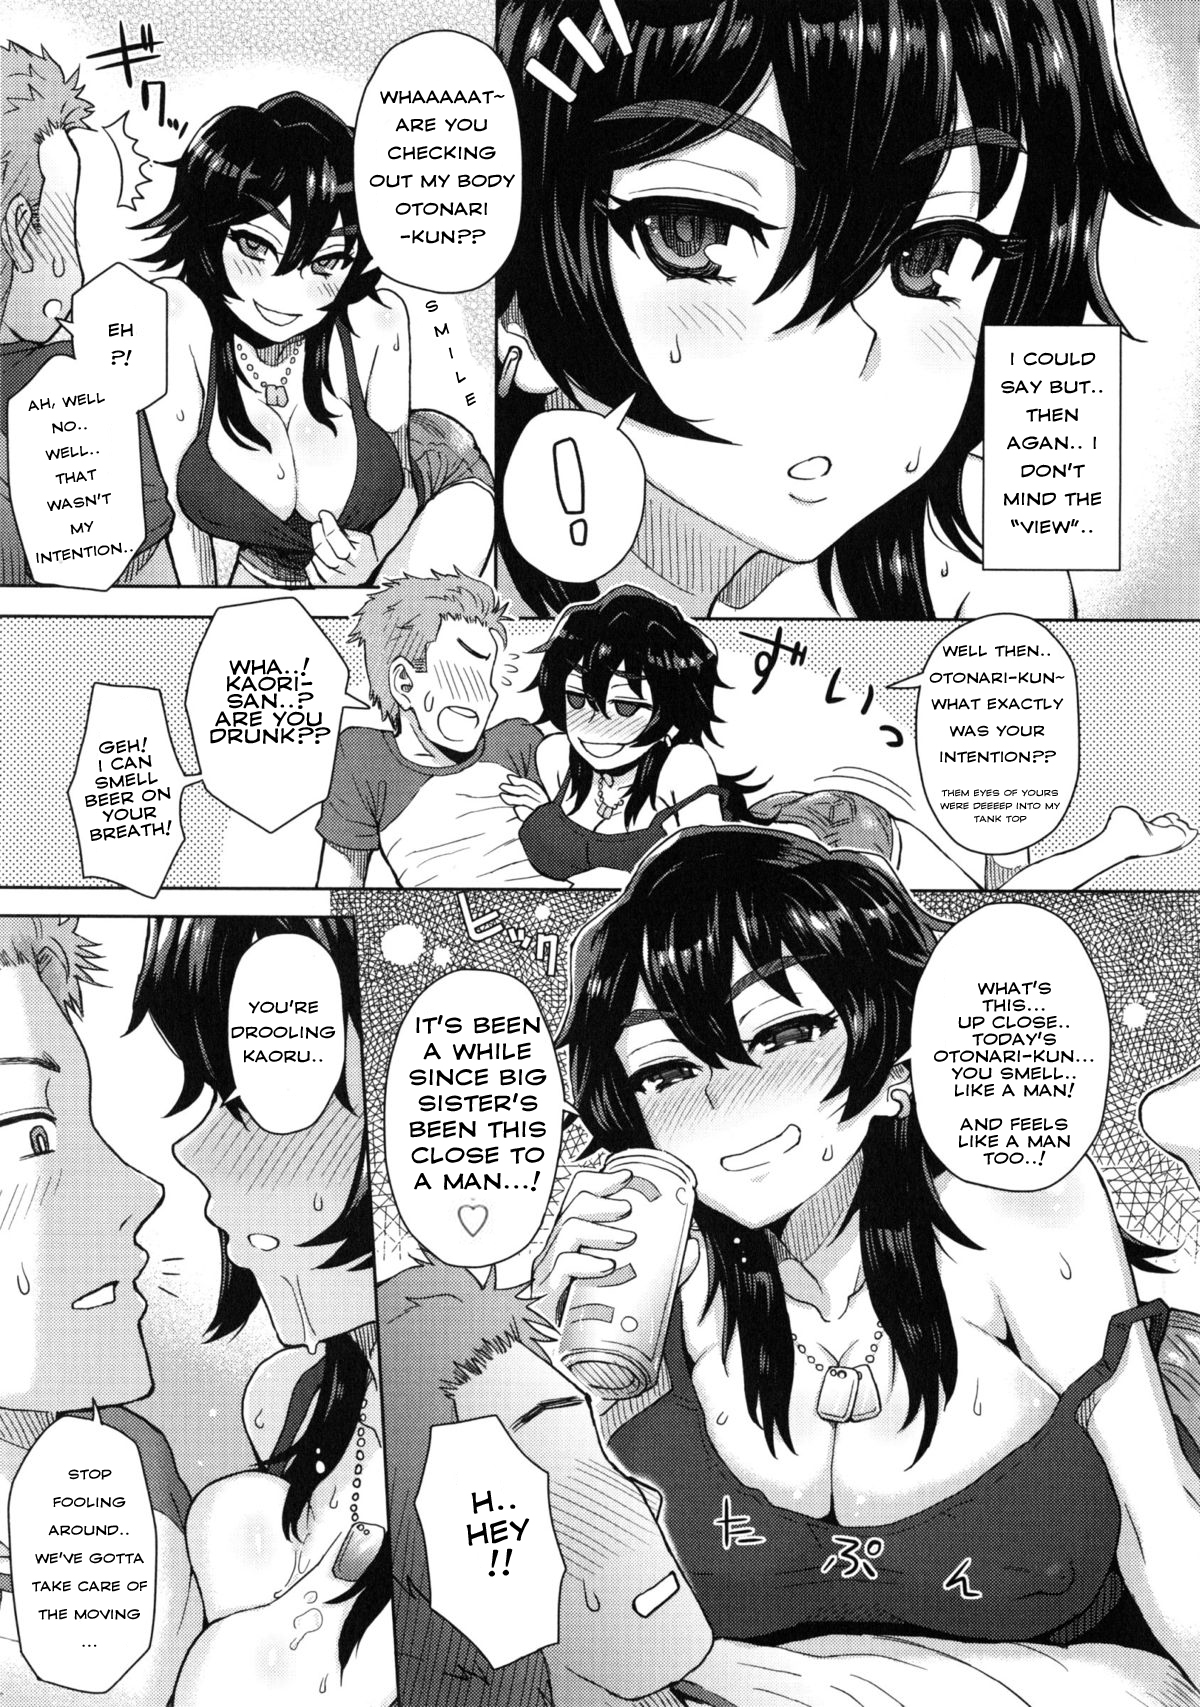 [Itou Eight] The Situation with the Young Girl Next Door Moving in [English] page 3 full